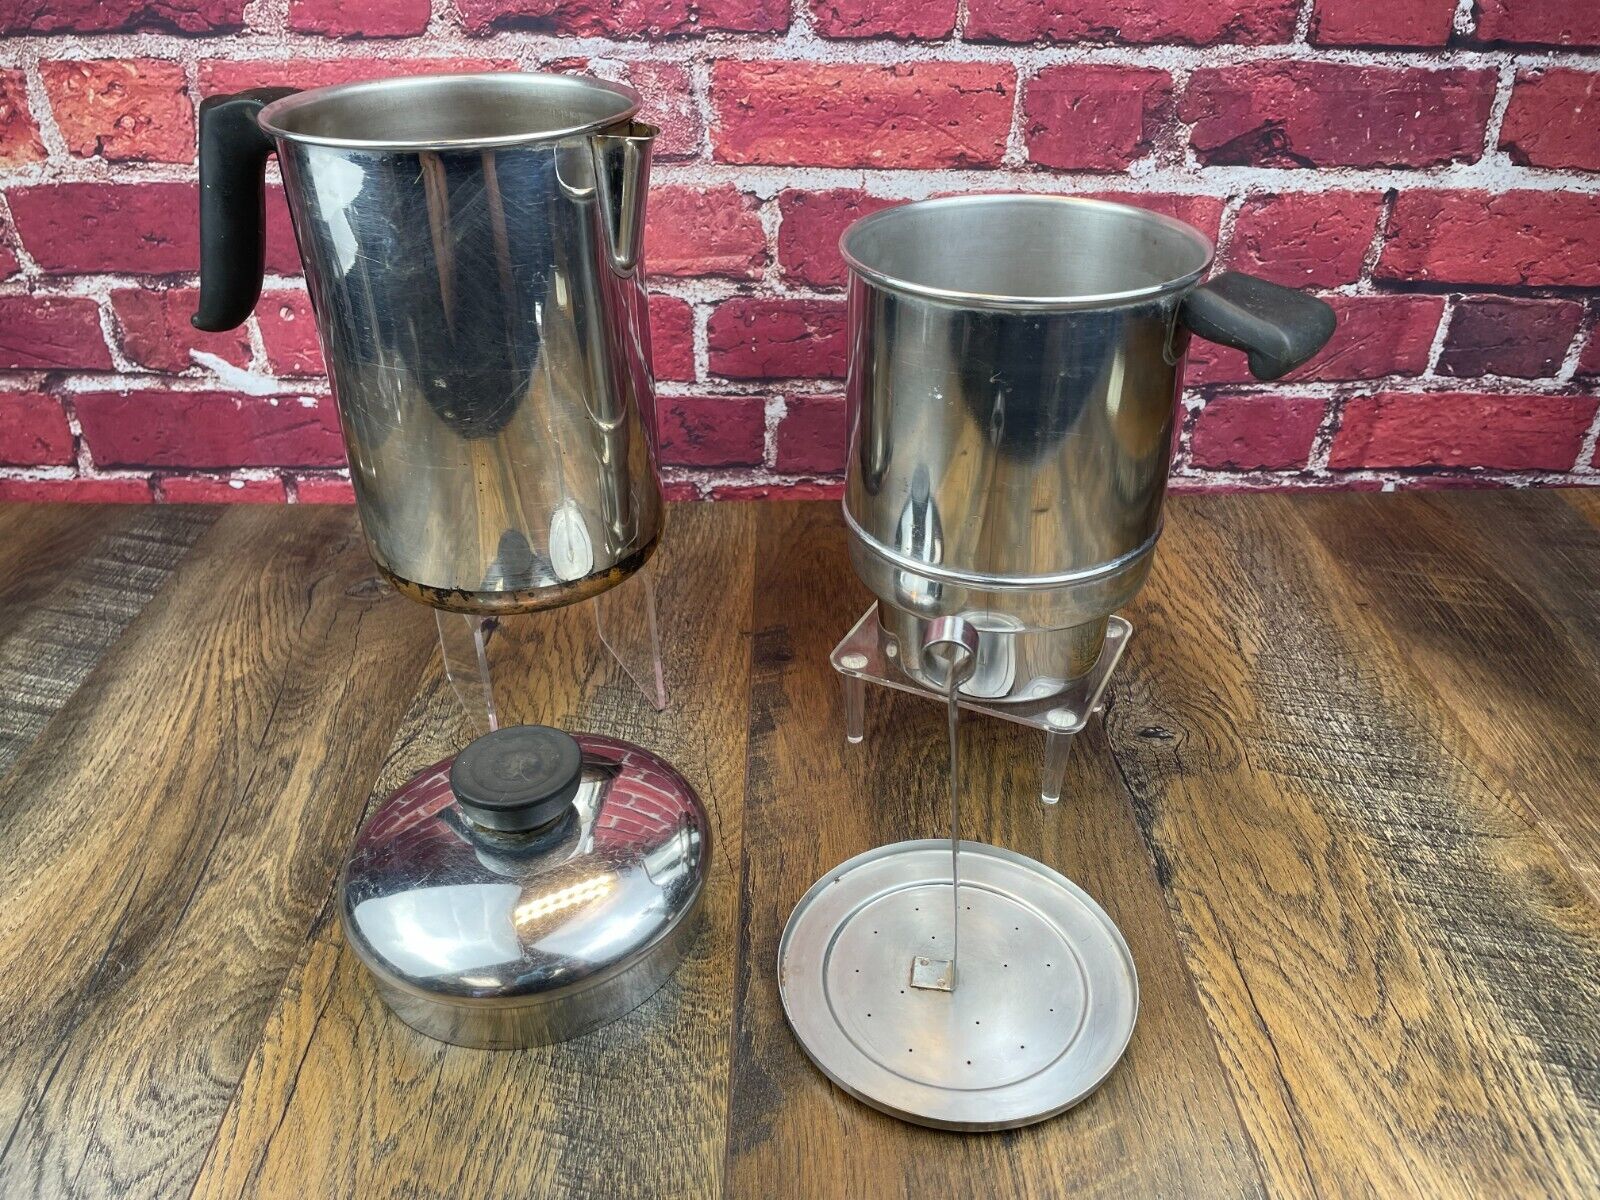 Vintage 1801 Revere Ware Coffee Percolator Copper Clad Stainless Steel